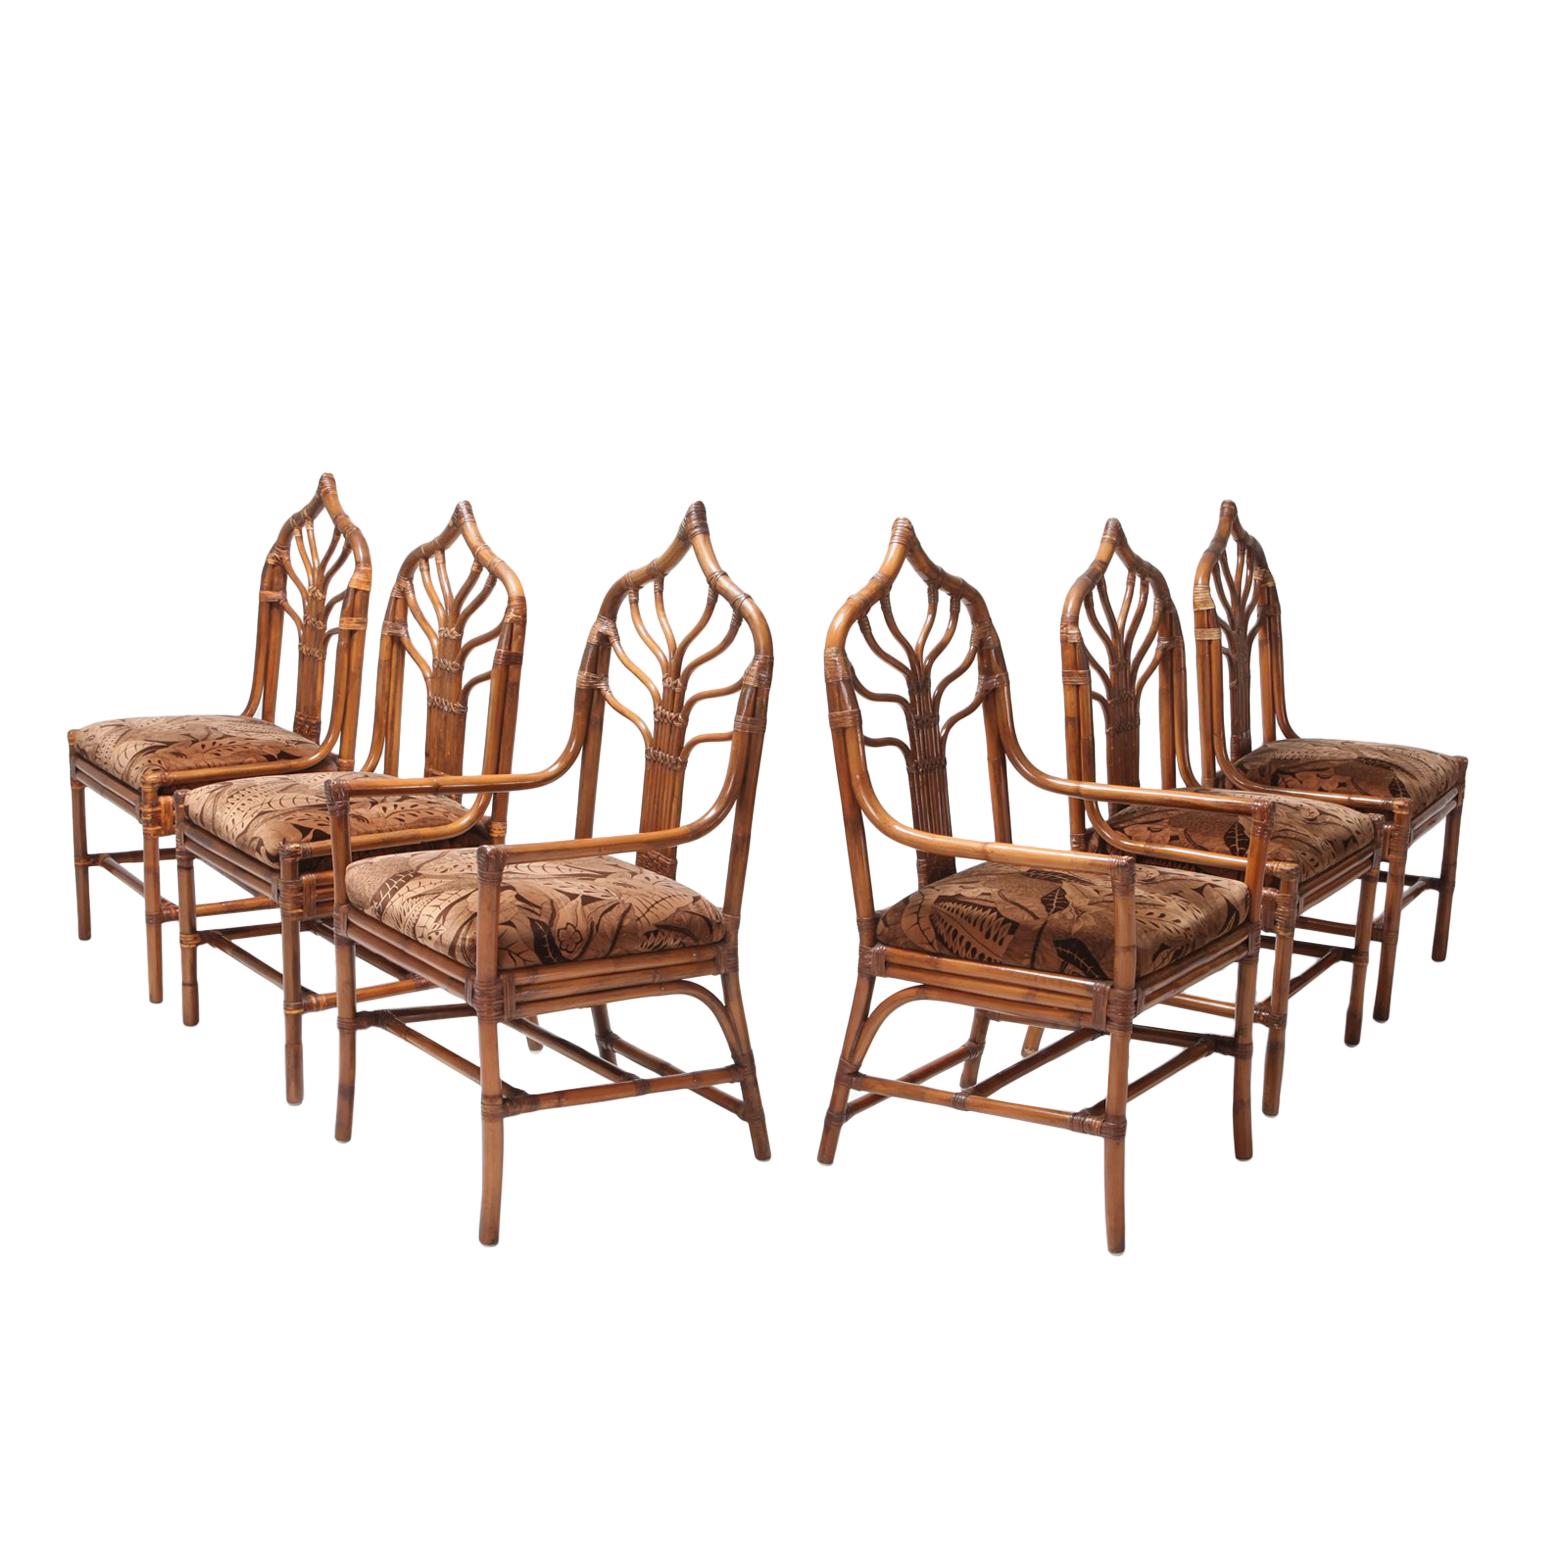 Regency Set of Italian Bamboo Dining Chairs with Floral Cushions